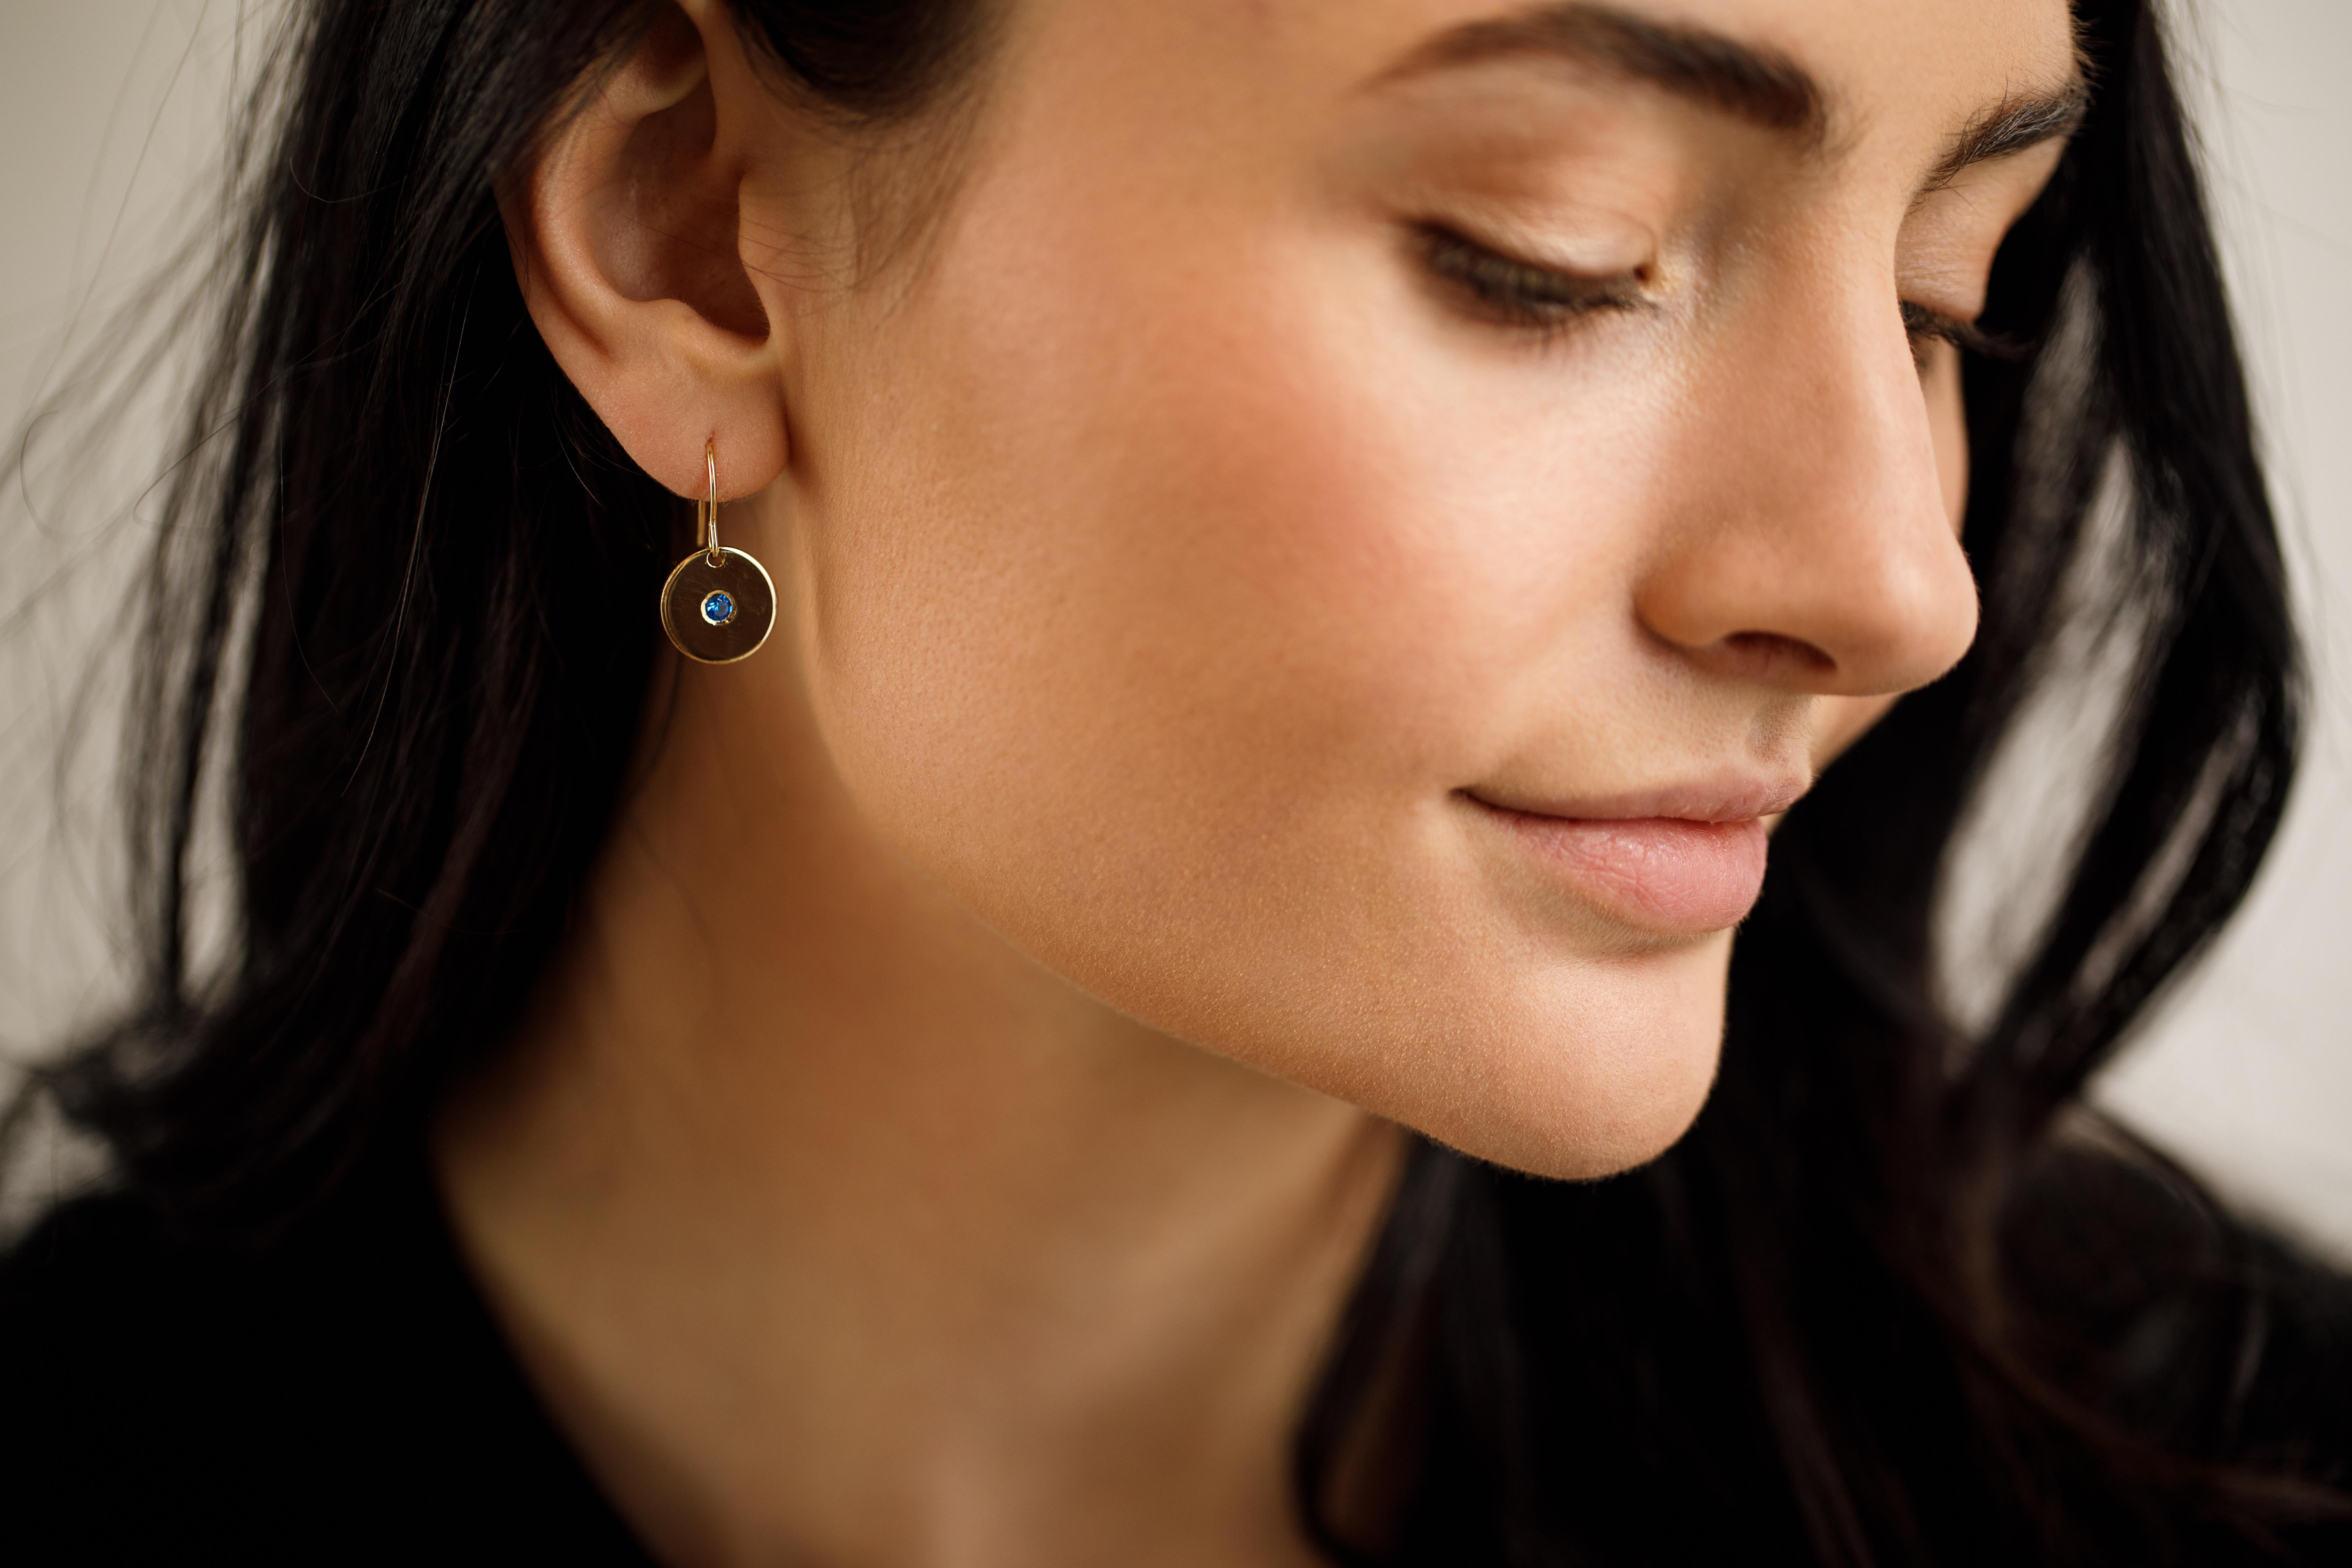 Our love affair with the diamond disks continues! The diamond disk earrings are simple and perfect for everyday wear.

-14k yellow gold 
-12mm disk 
-3mm white diamond, can customize stone
-french earwire